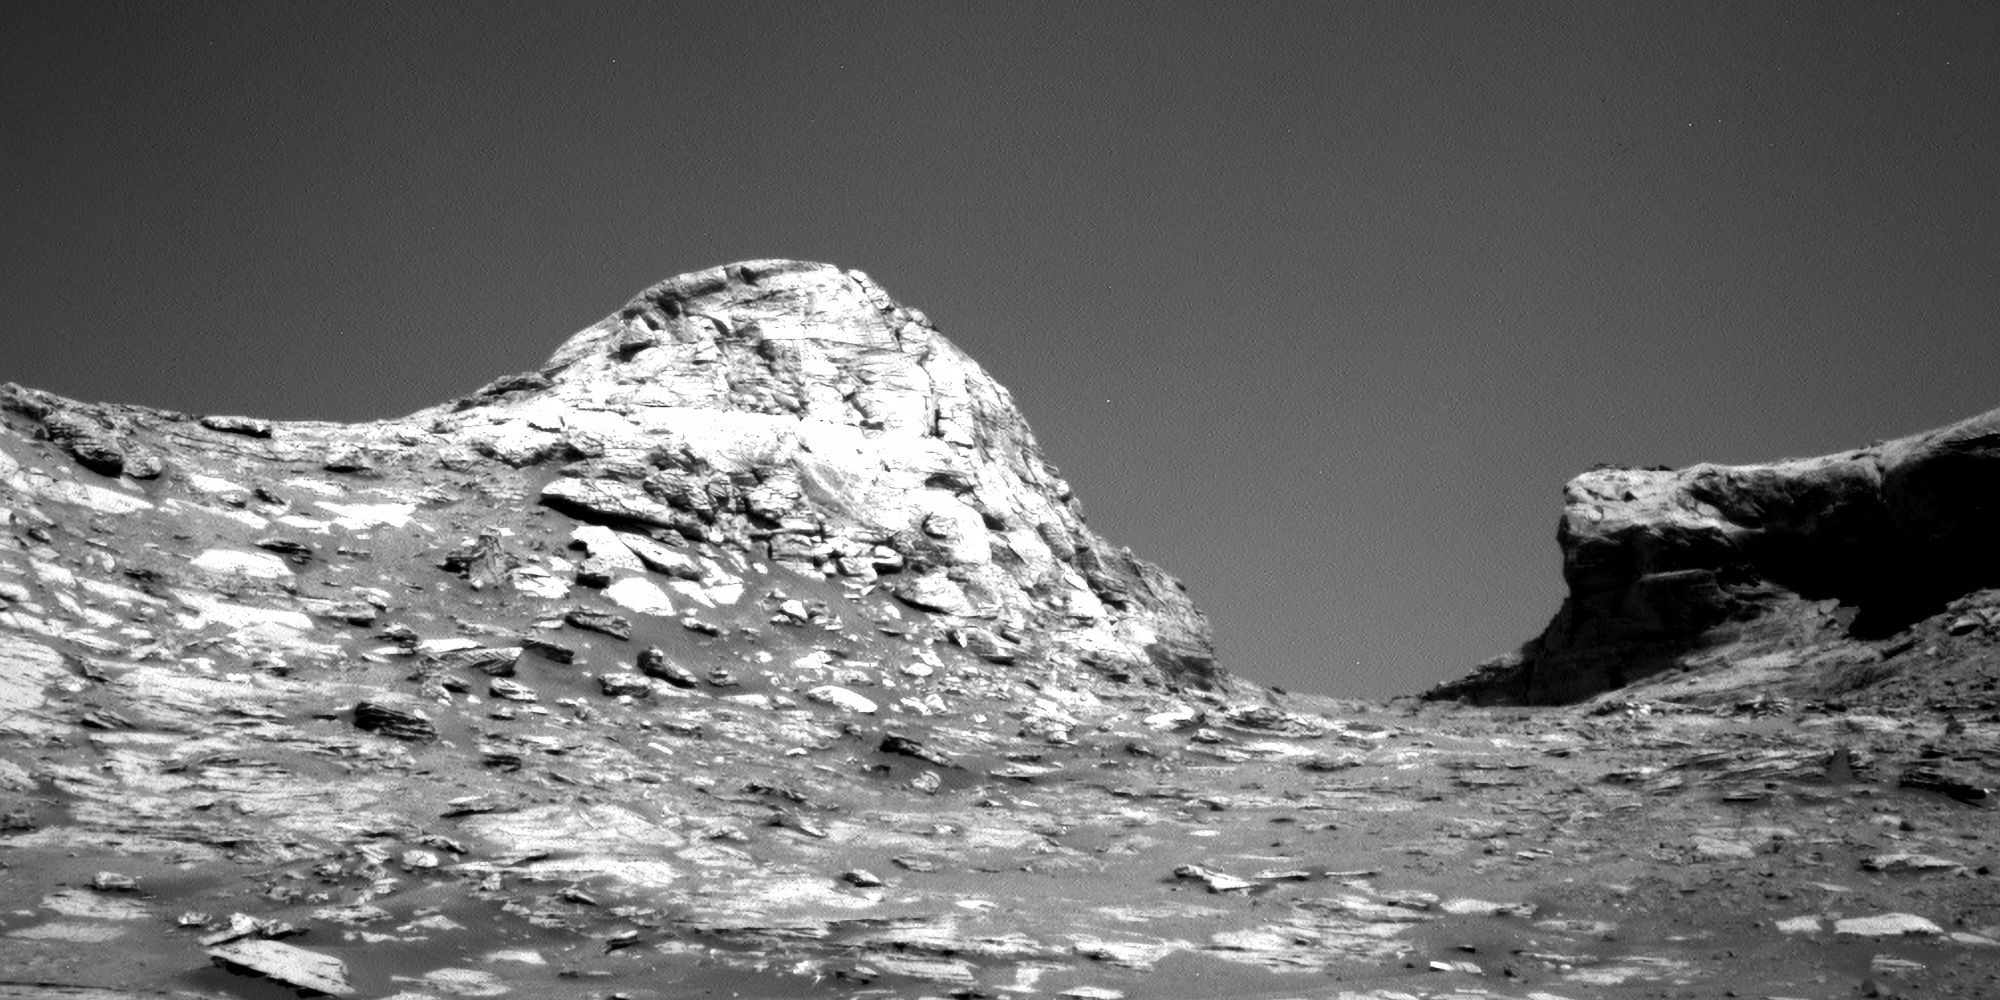 Curiosity Finds Two Very Different Rocks While Exploring Mars